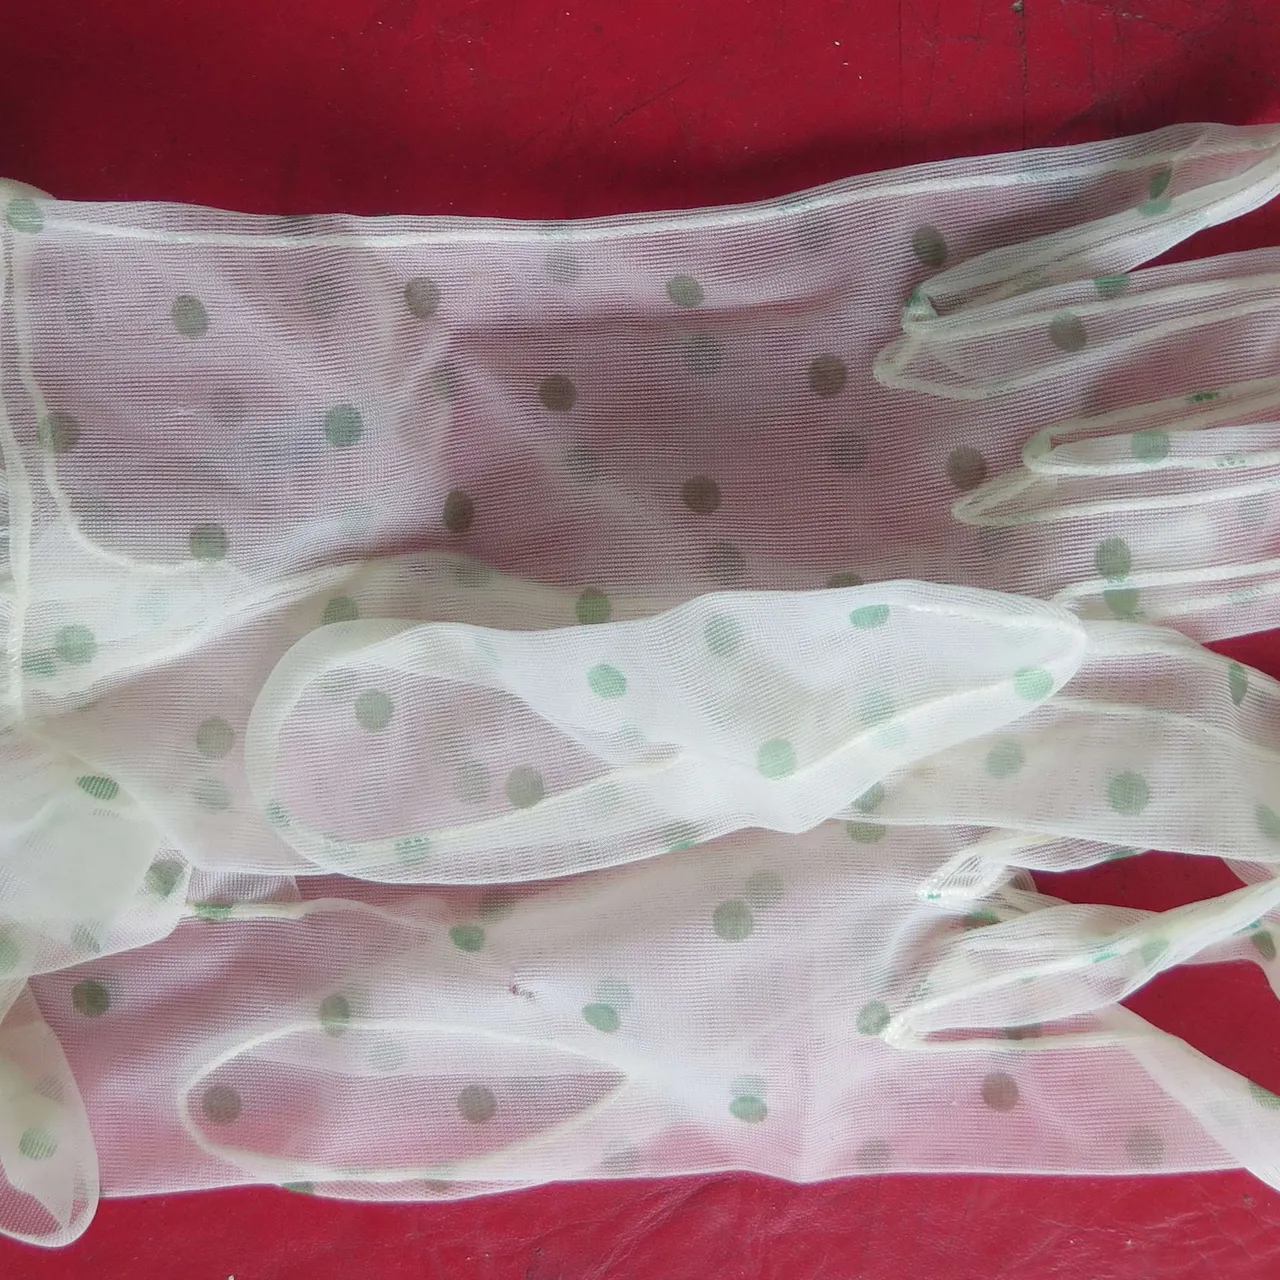 VINTAGE 1960s sheer gloves with green polka dots photo 1